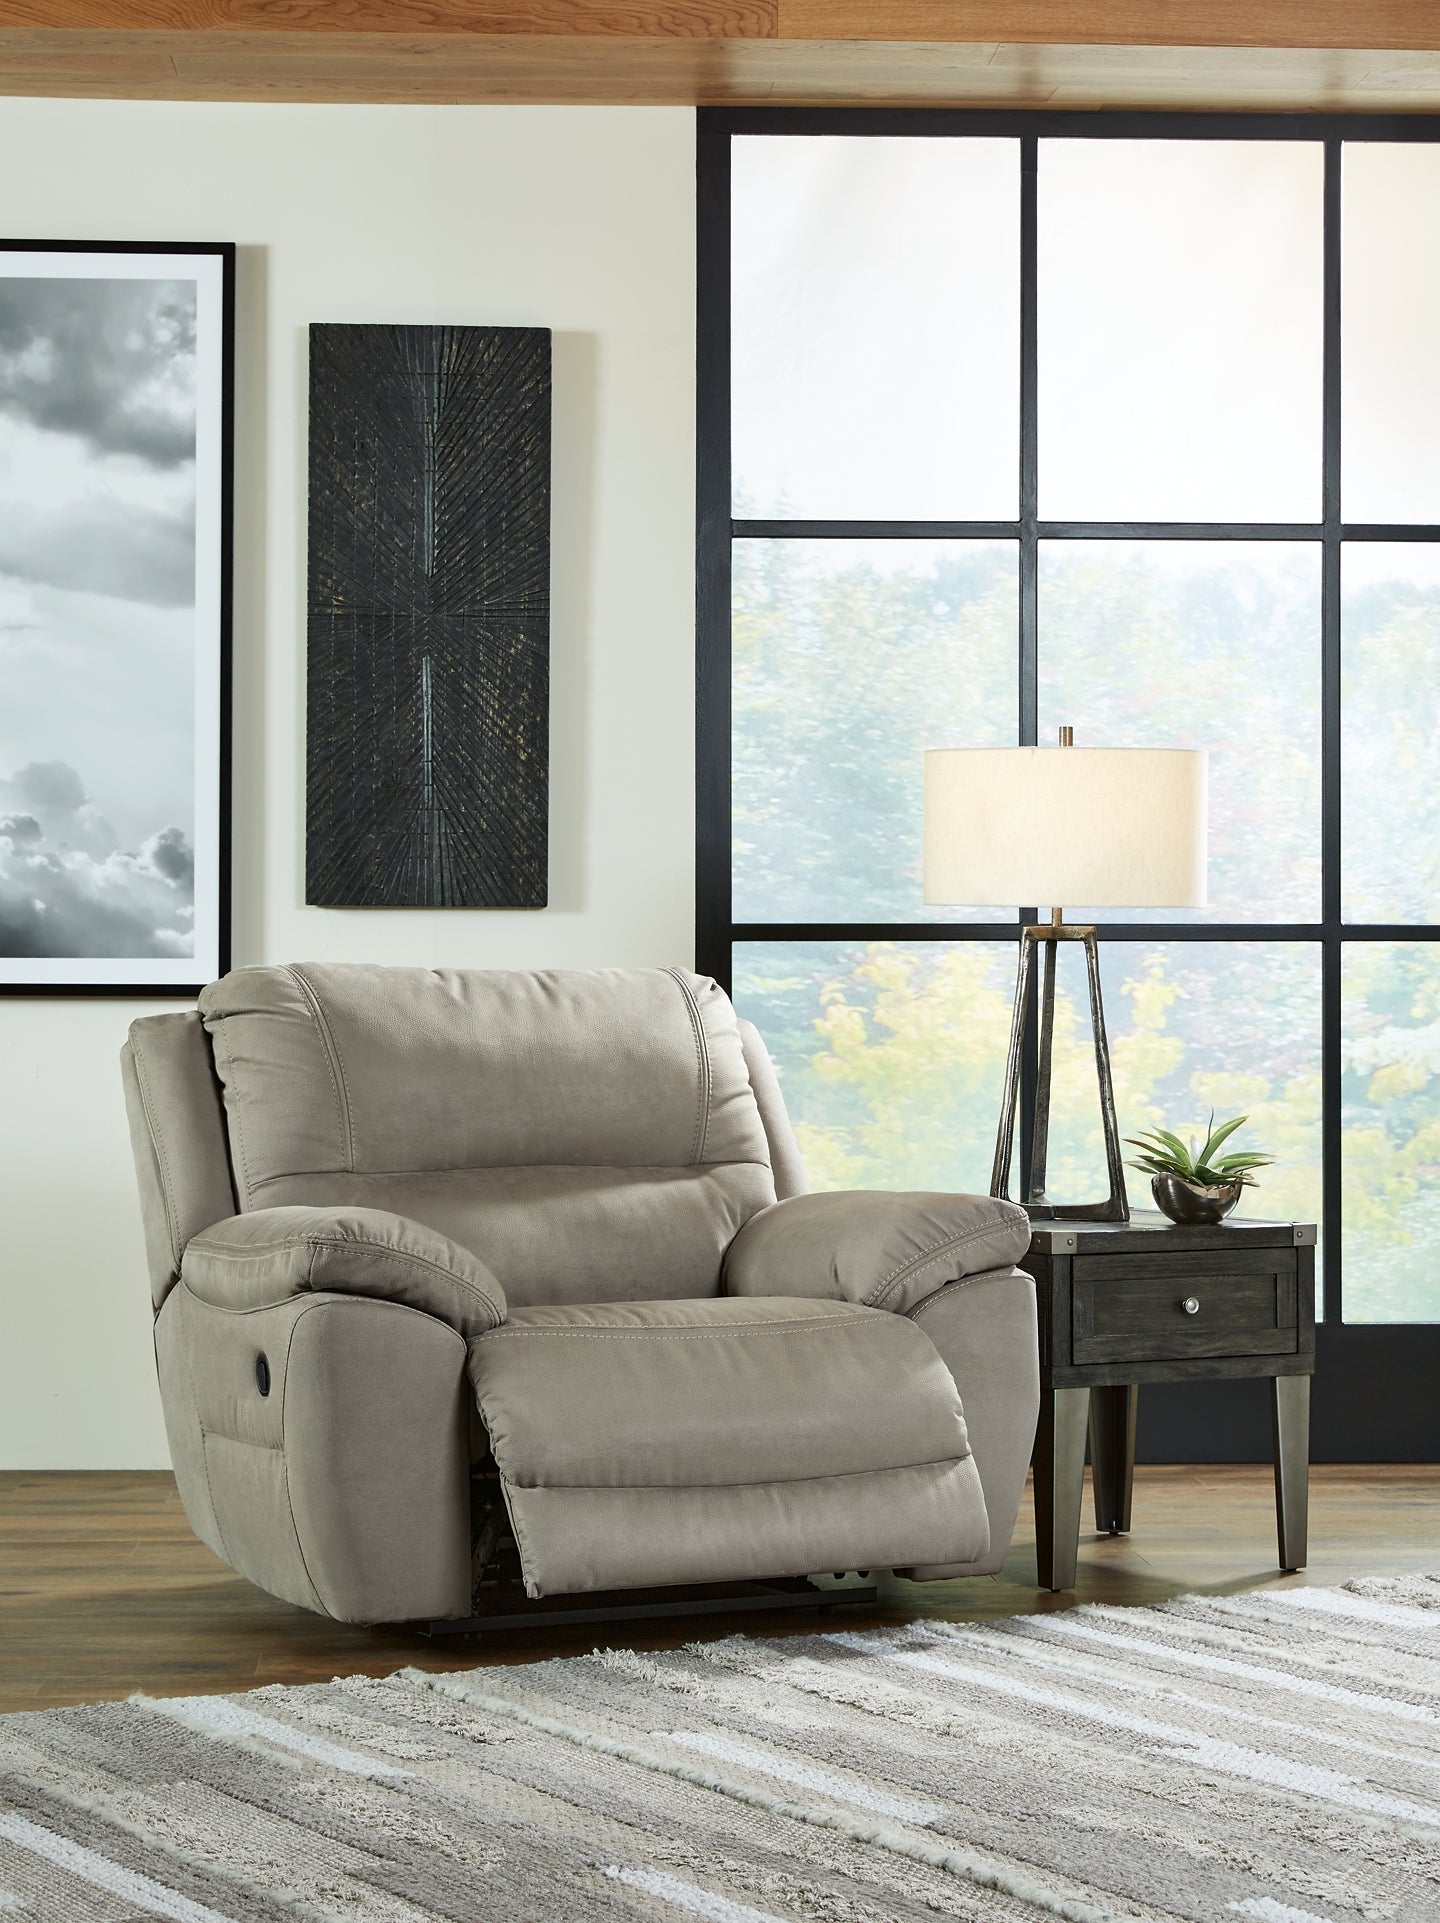 Next-Gen Gaucho Sofa, Loveseat and Recliner Rent Wise Rent To Own Jacksonville, Florida